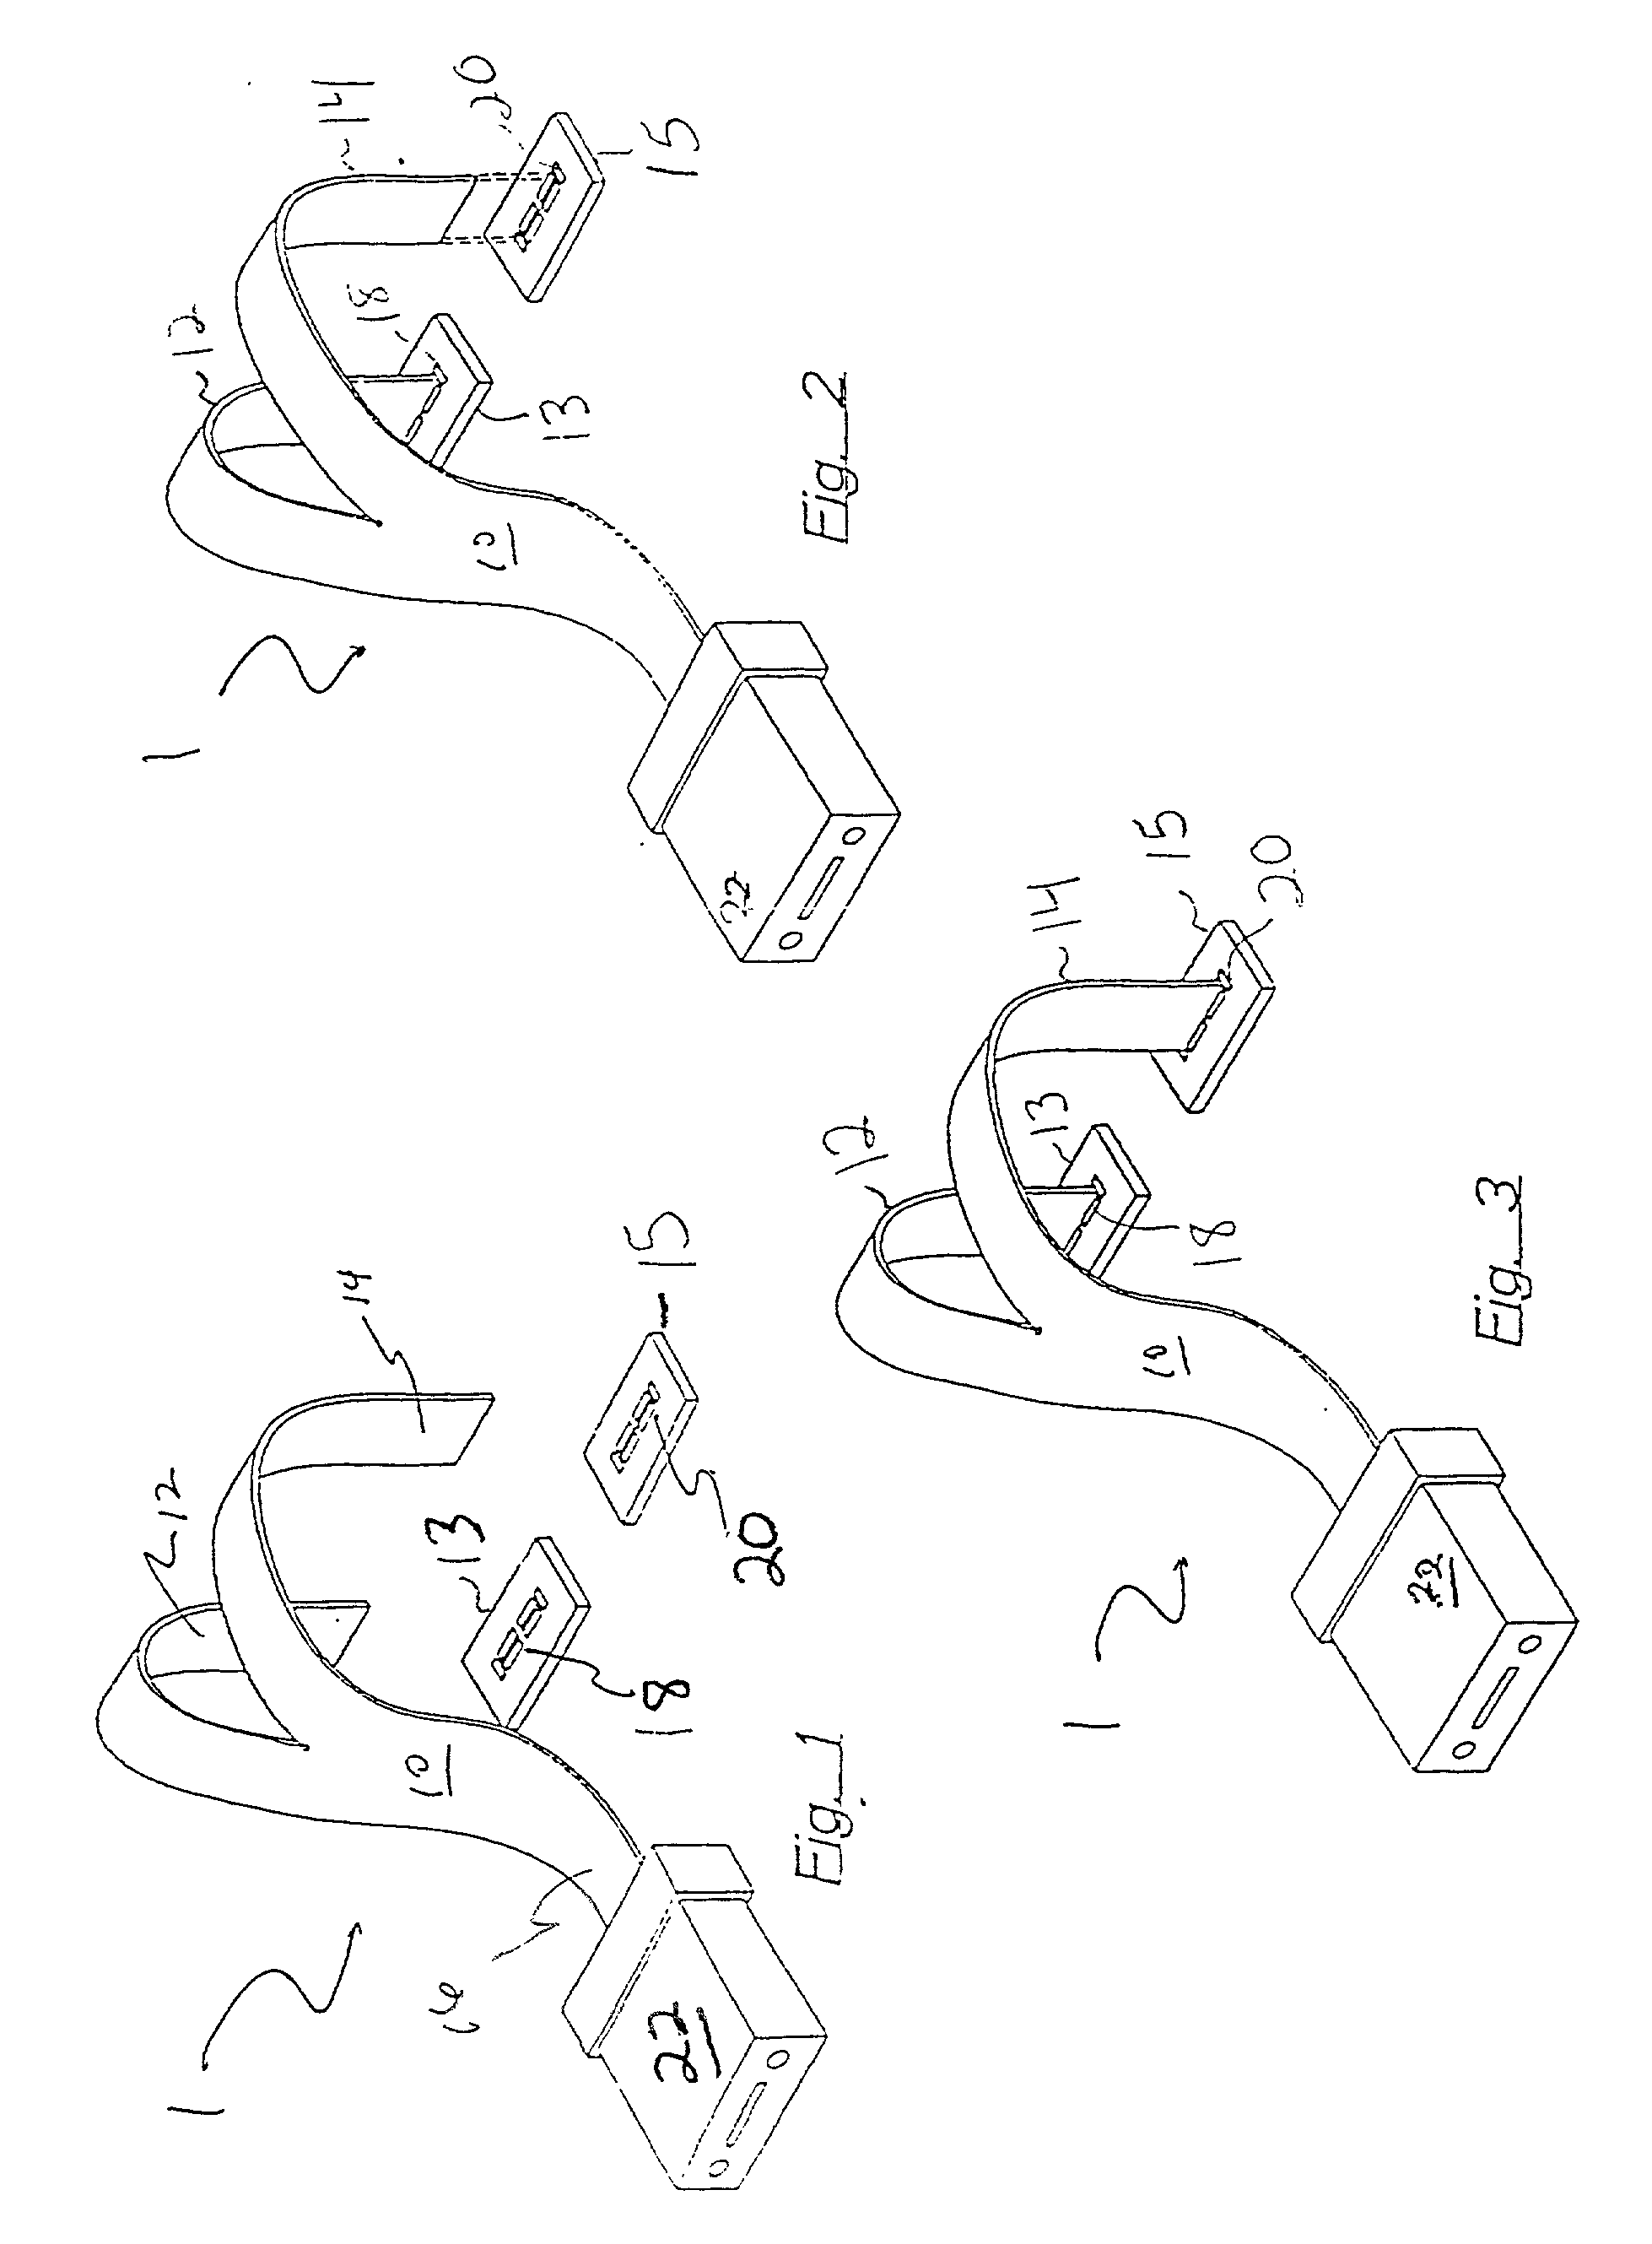 Brent waveguide for connection to at least one device, adaptive passive alignment features facilitating the connection and associated methods